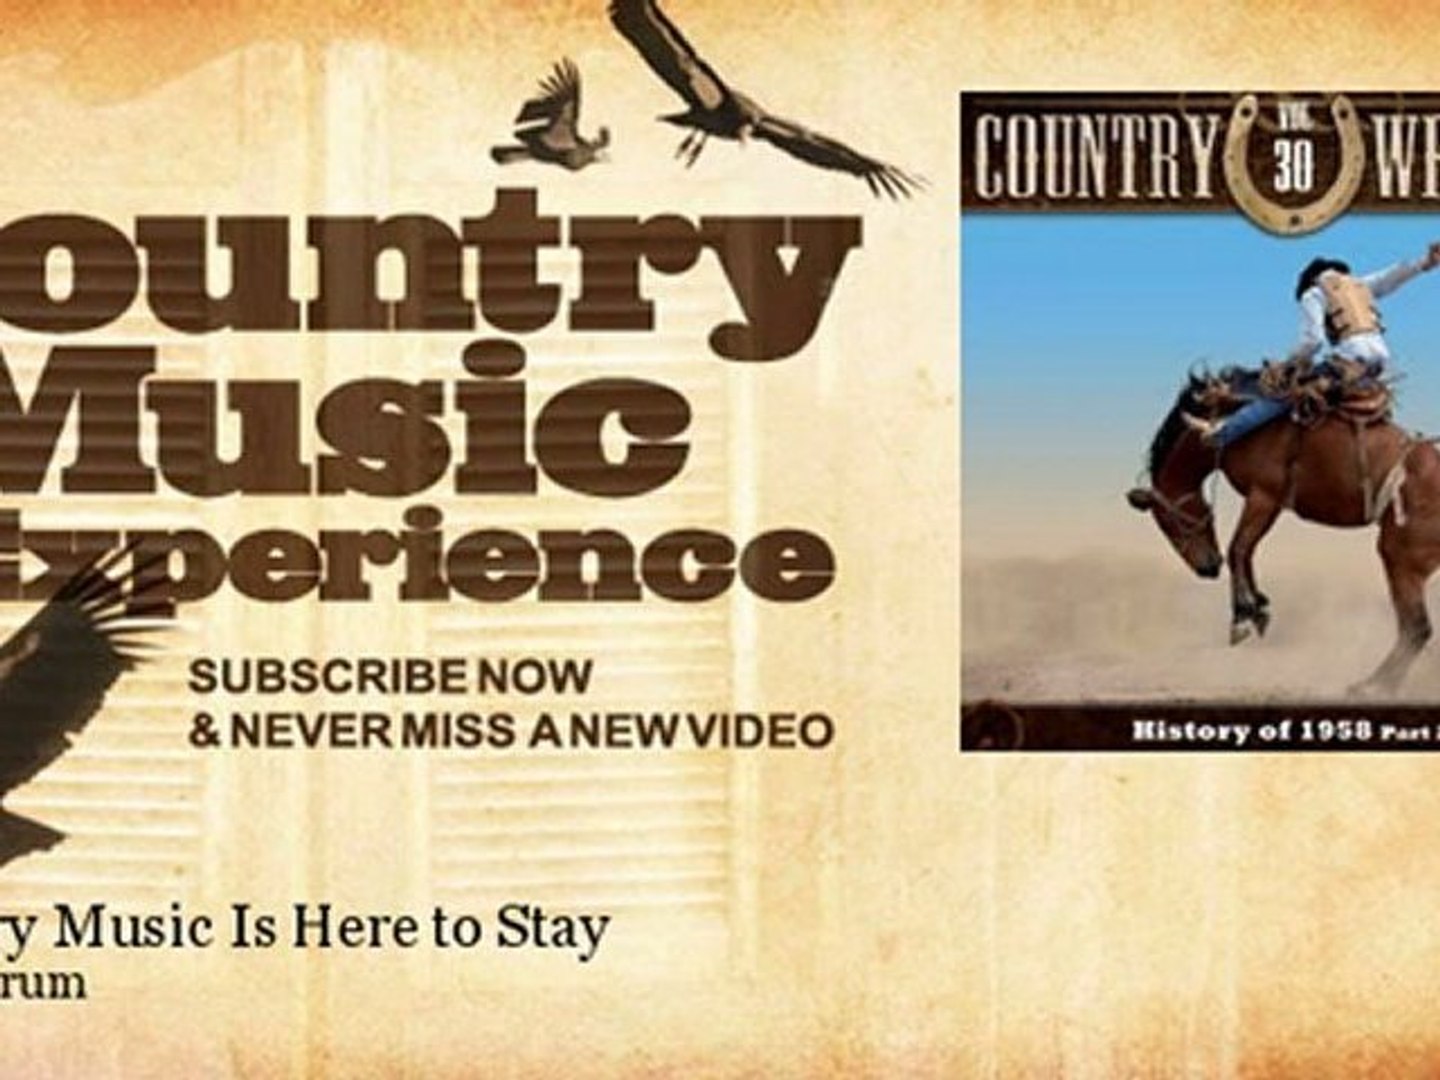 Simon Crum - Country Music Is Here to Stay - Country Music Experience